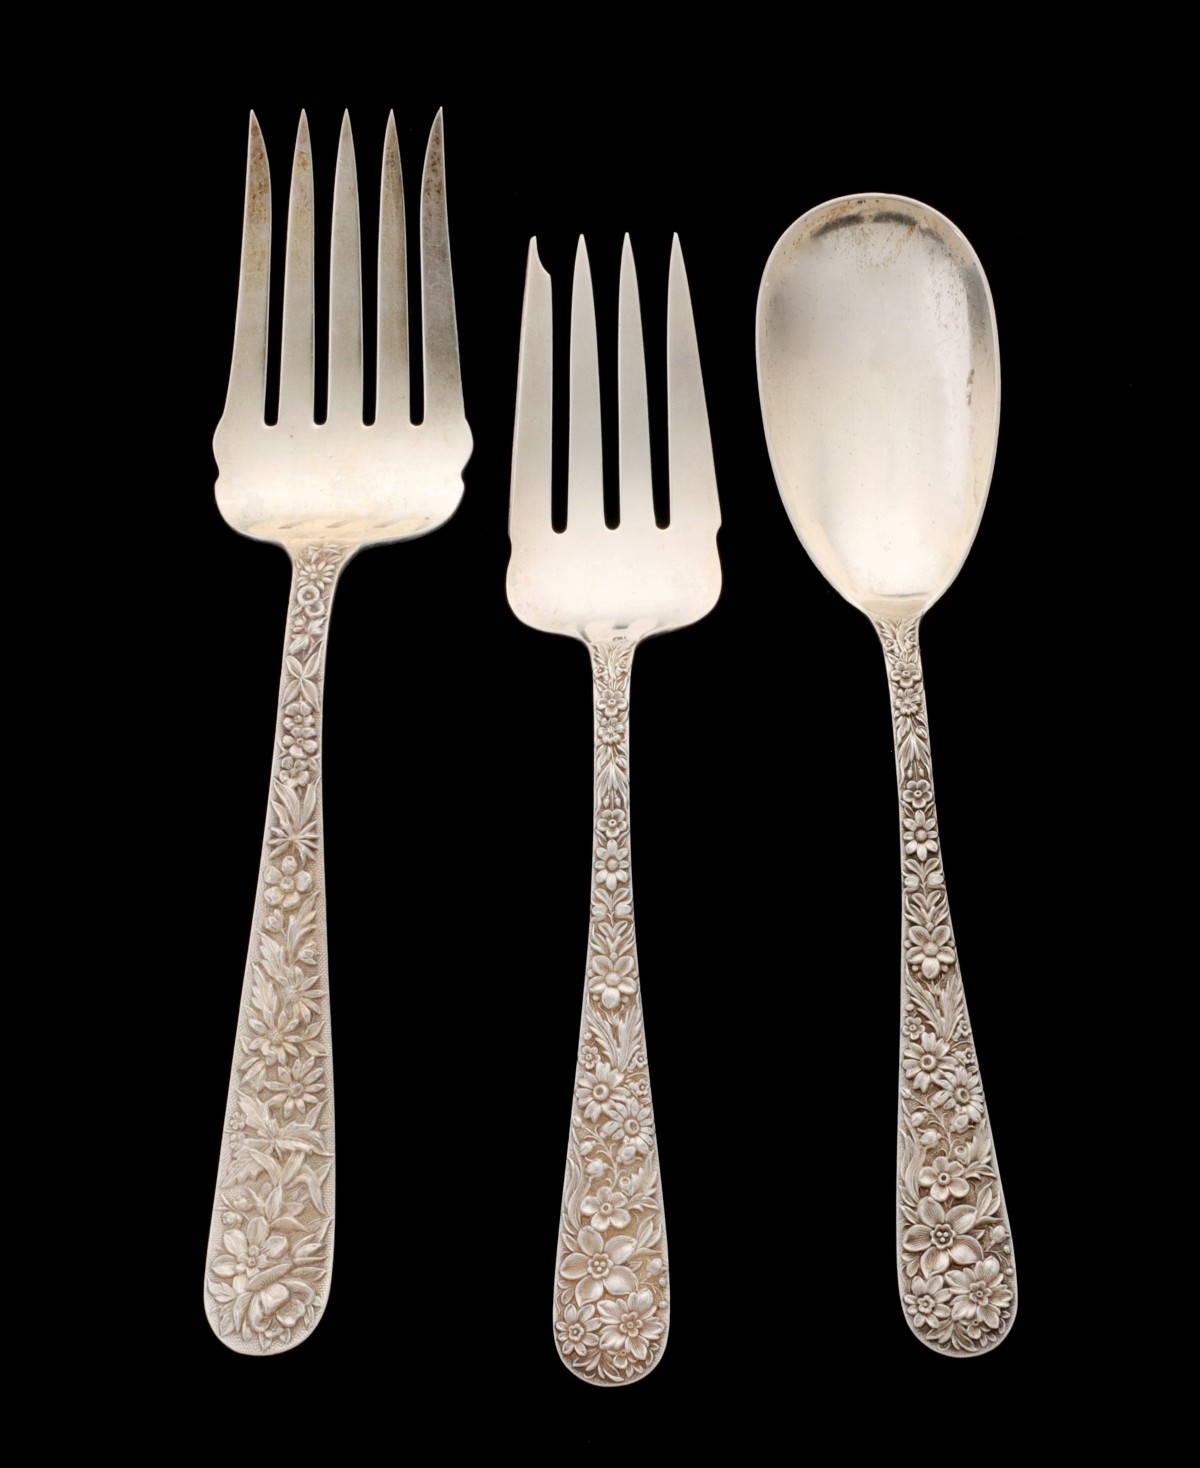 S. KIRK AND SON REPOUSSE STERLING SILVER SERVING PIECES